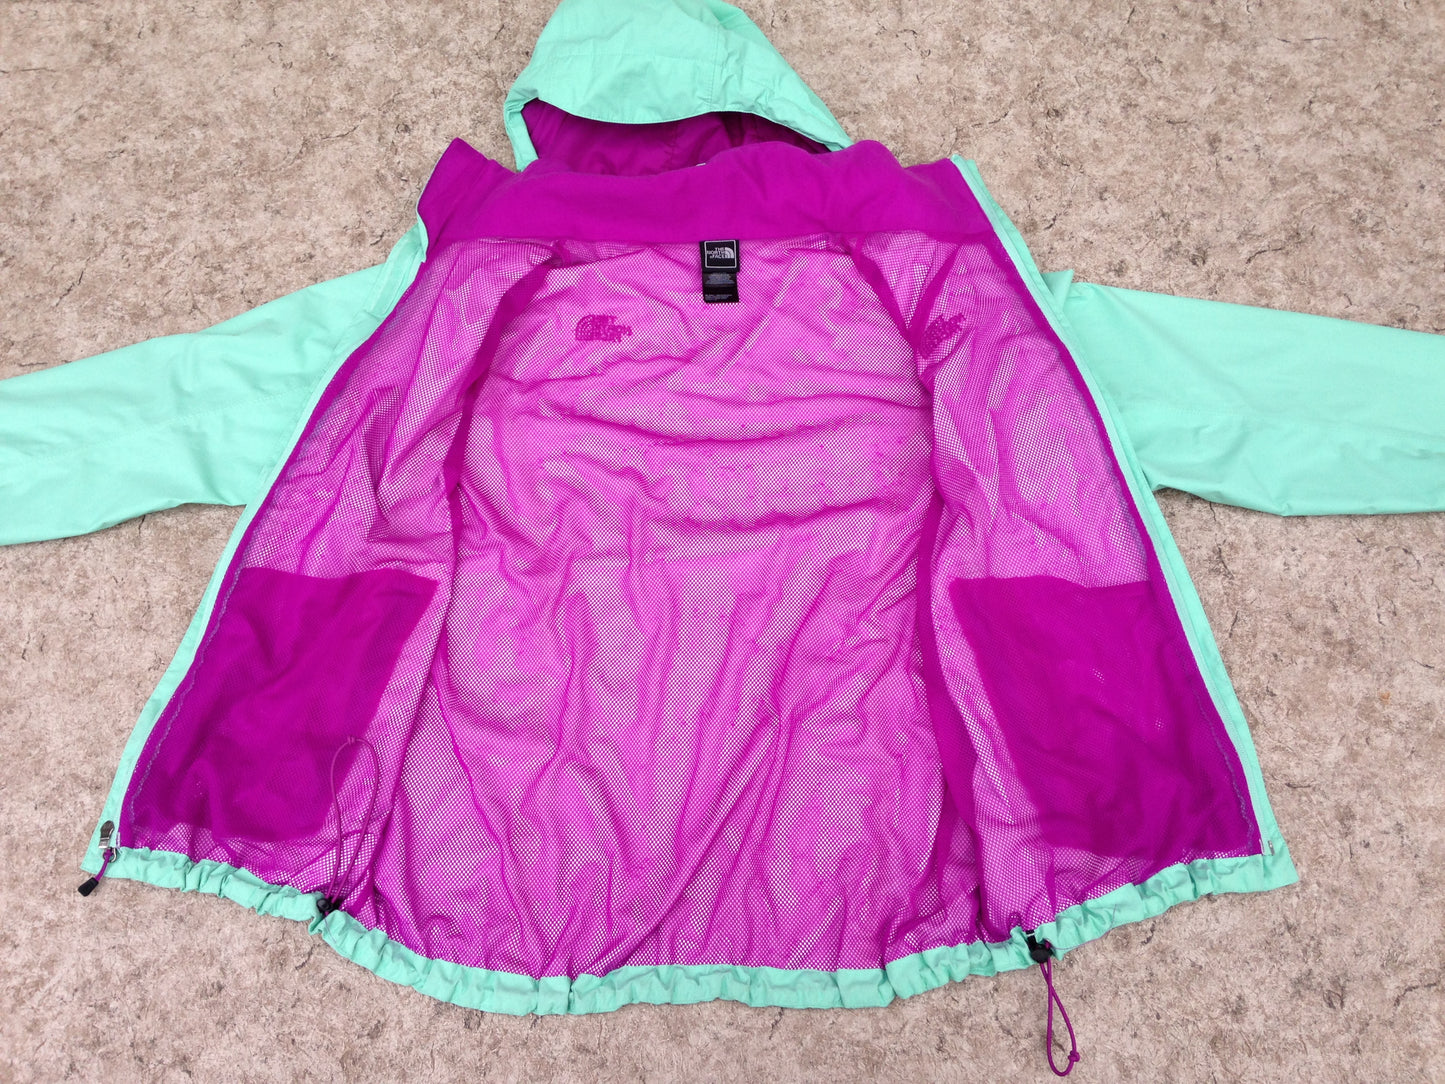 Rain Coat Ladies Size Large The North Face Teal and Purple Excellent